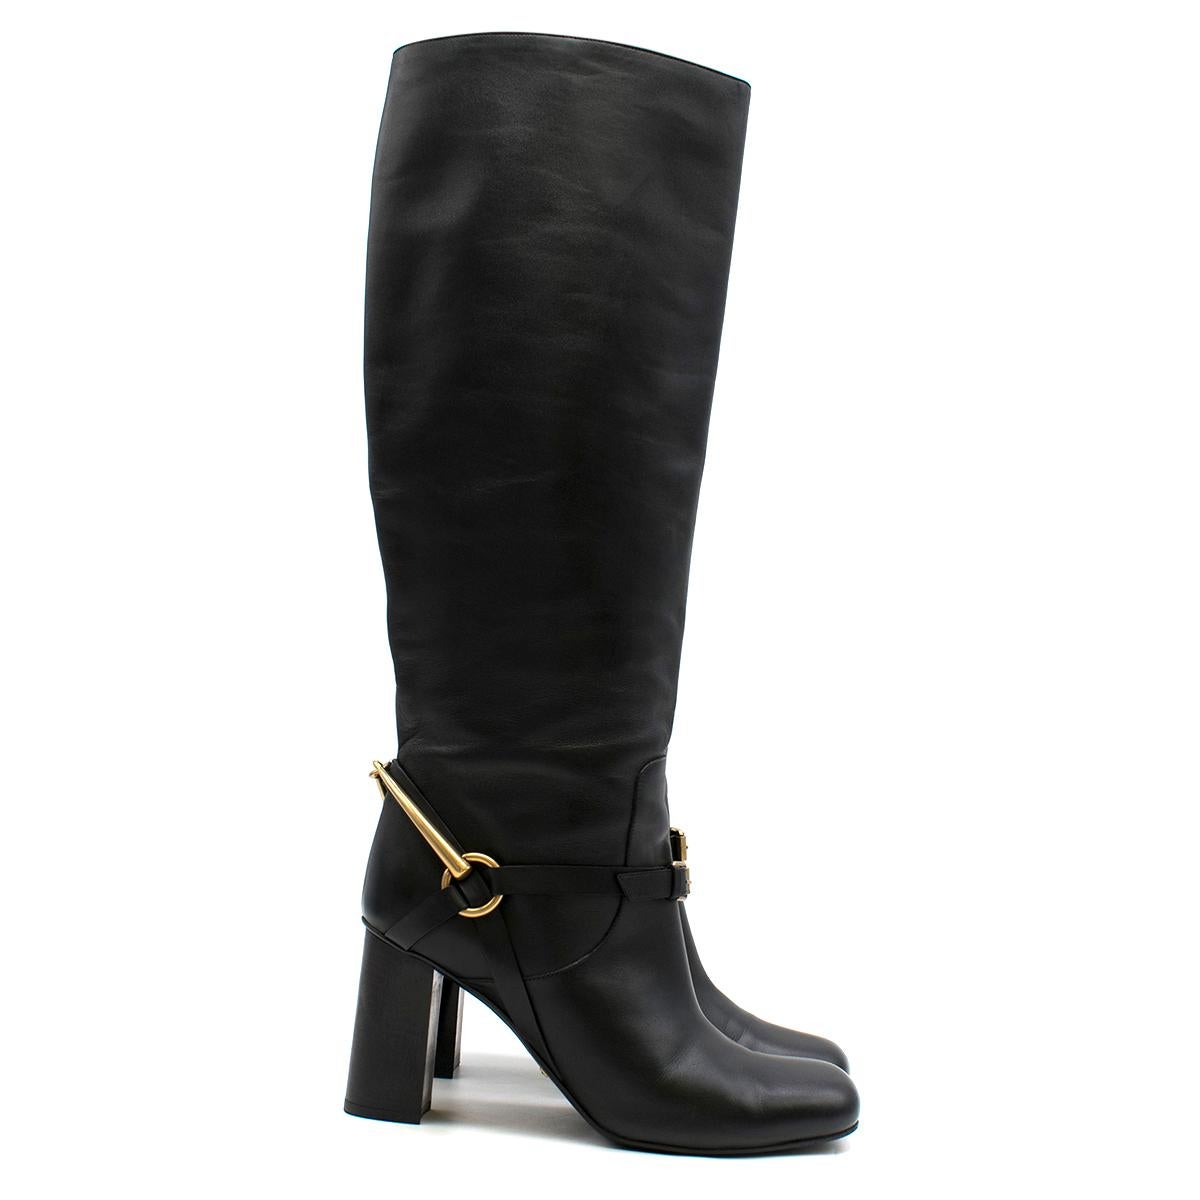 Gucci stirrup-heel leather boots 

- Black, smooth leather 
- Rounded square toe, high stacked leather block heel
- Antiqued gold-tone metal stirrup-effect heel feature
- Buckle-fastening arch strap 
- Black leather lining and insole 
- Black